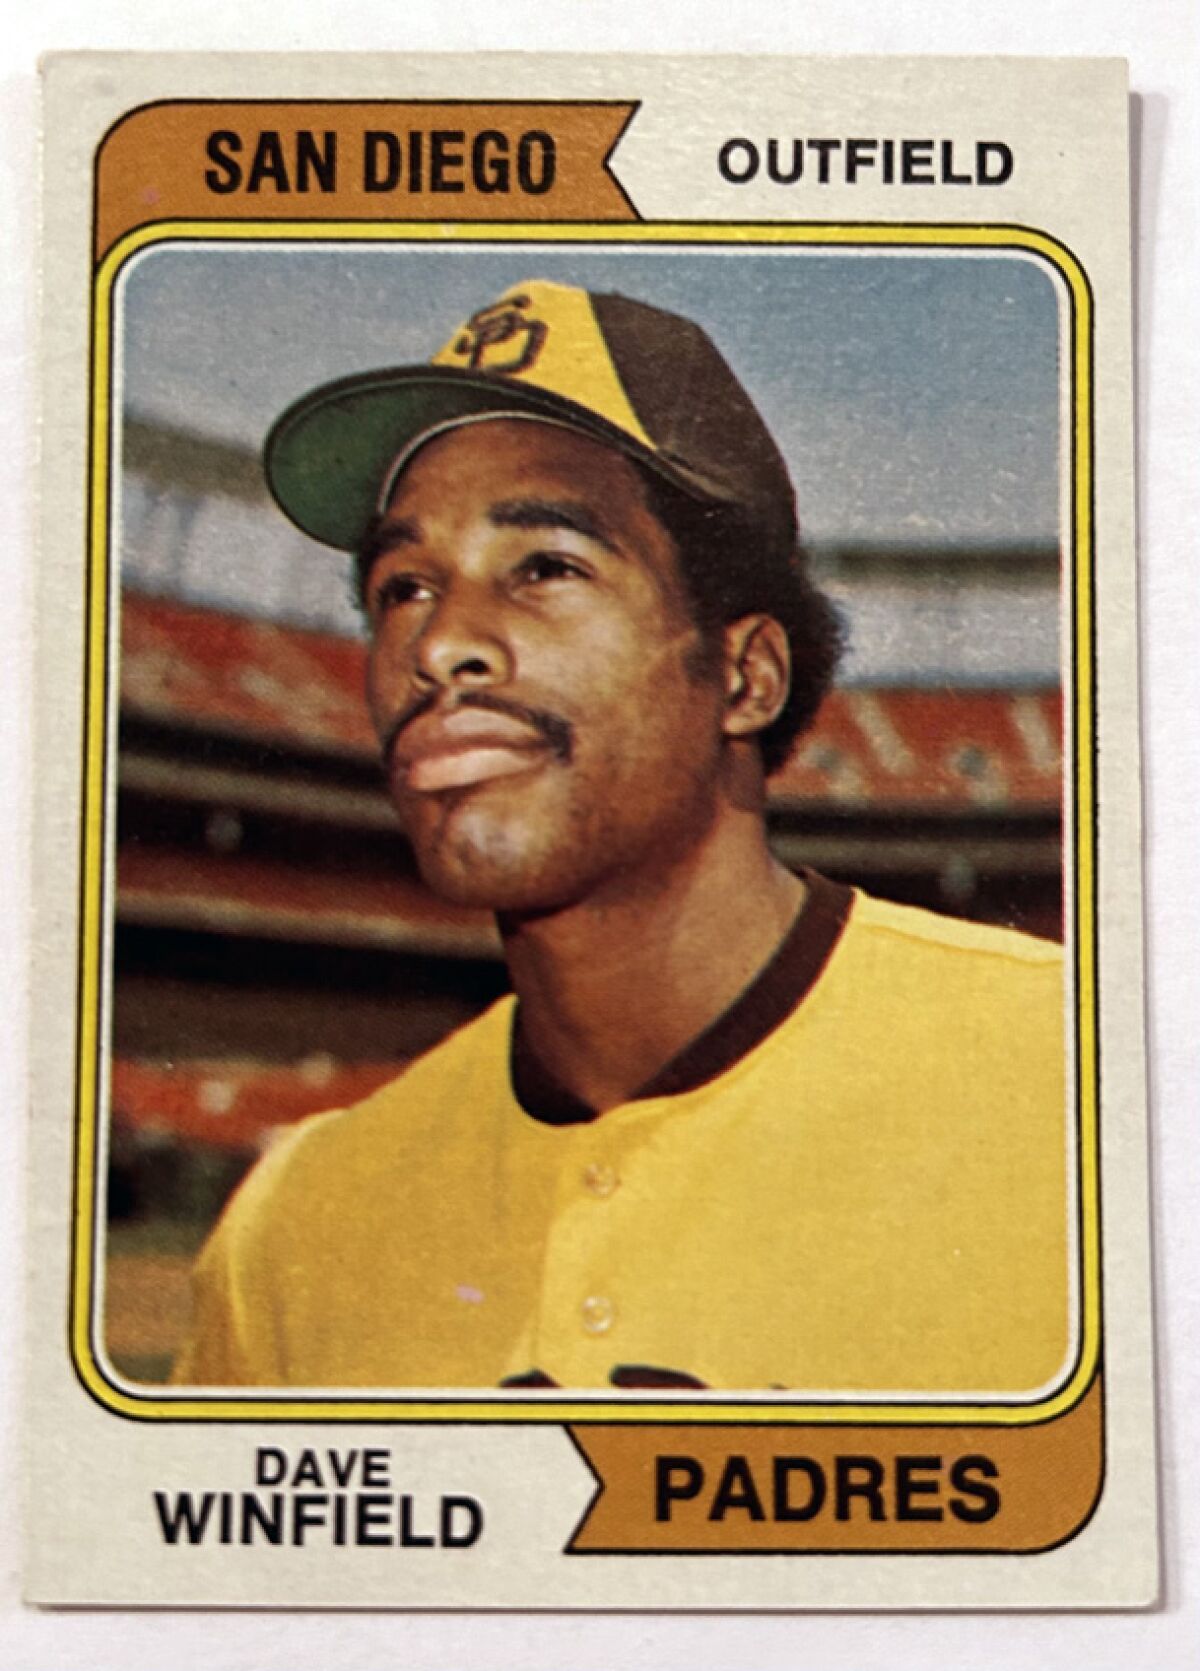 Dave Winfield's 1974 Topps rookie card notes birth Oct. 3, 1951, same day as Bobby Thomson's "Giants win the pennant!" homer.